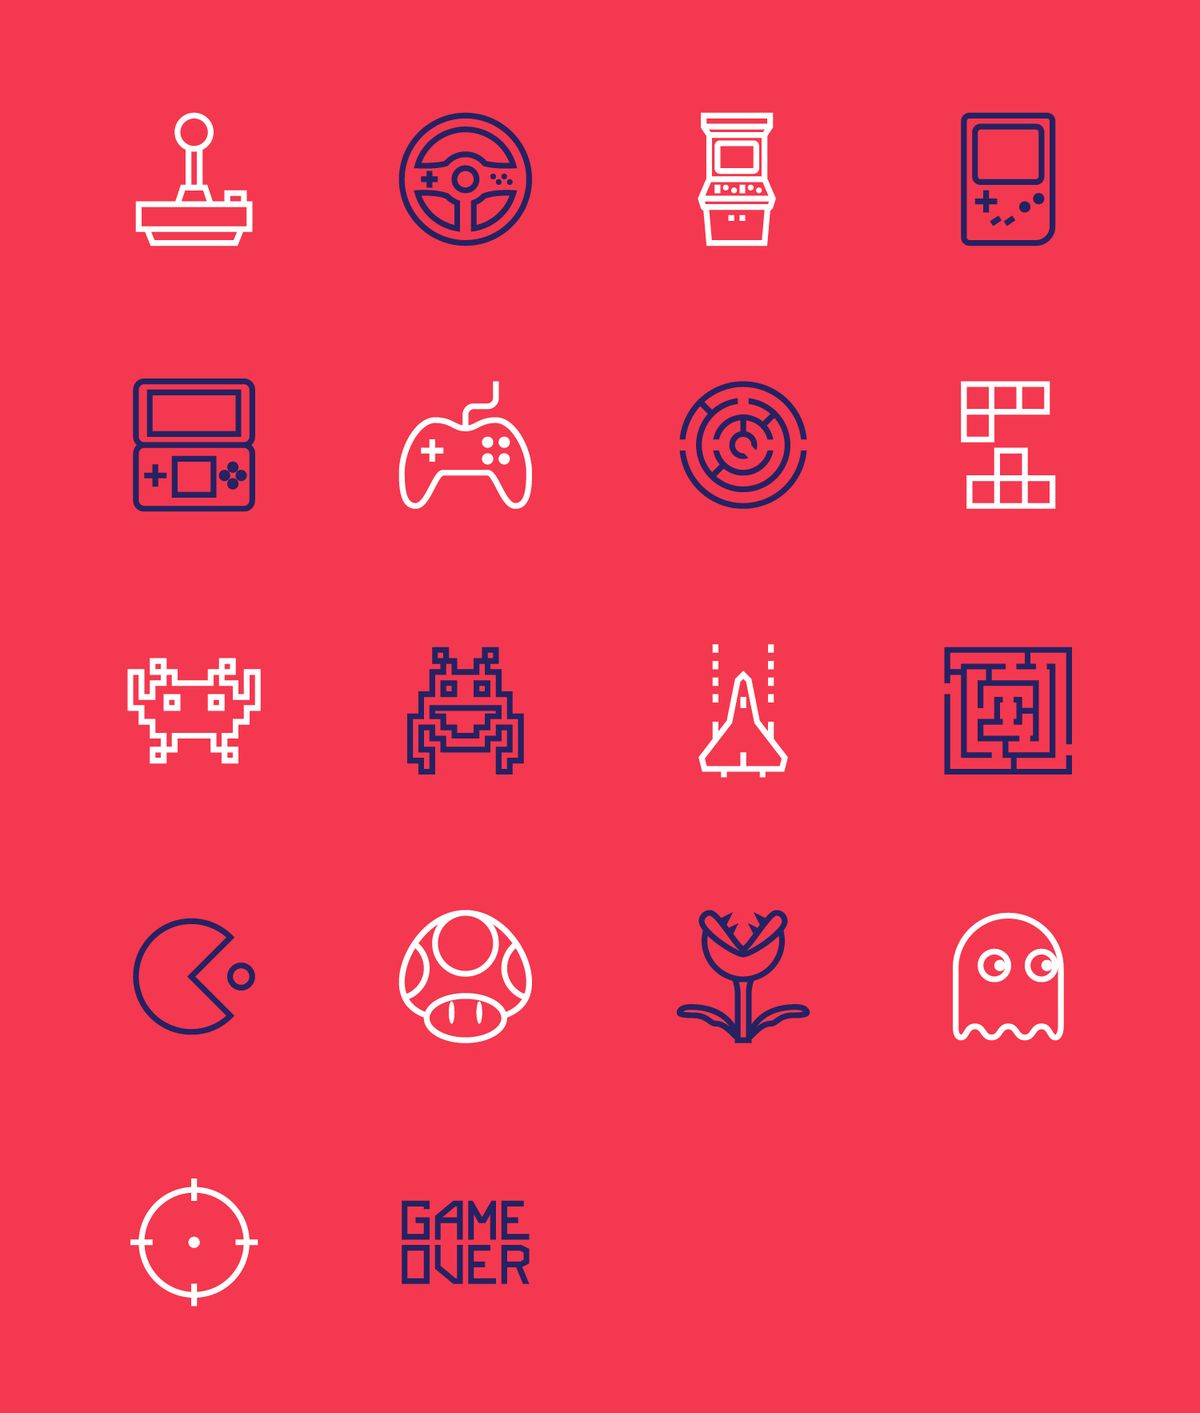 Custom Icons For Game Over Book Illustration 2